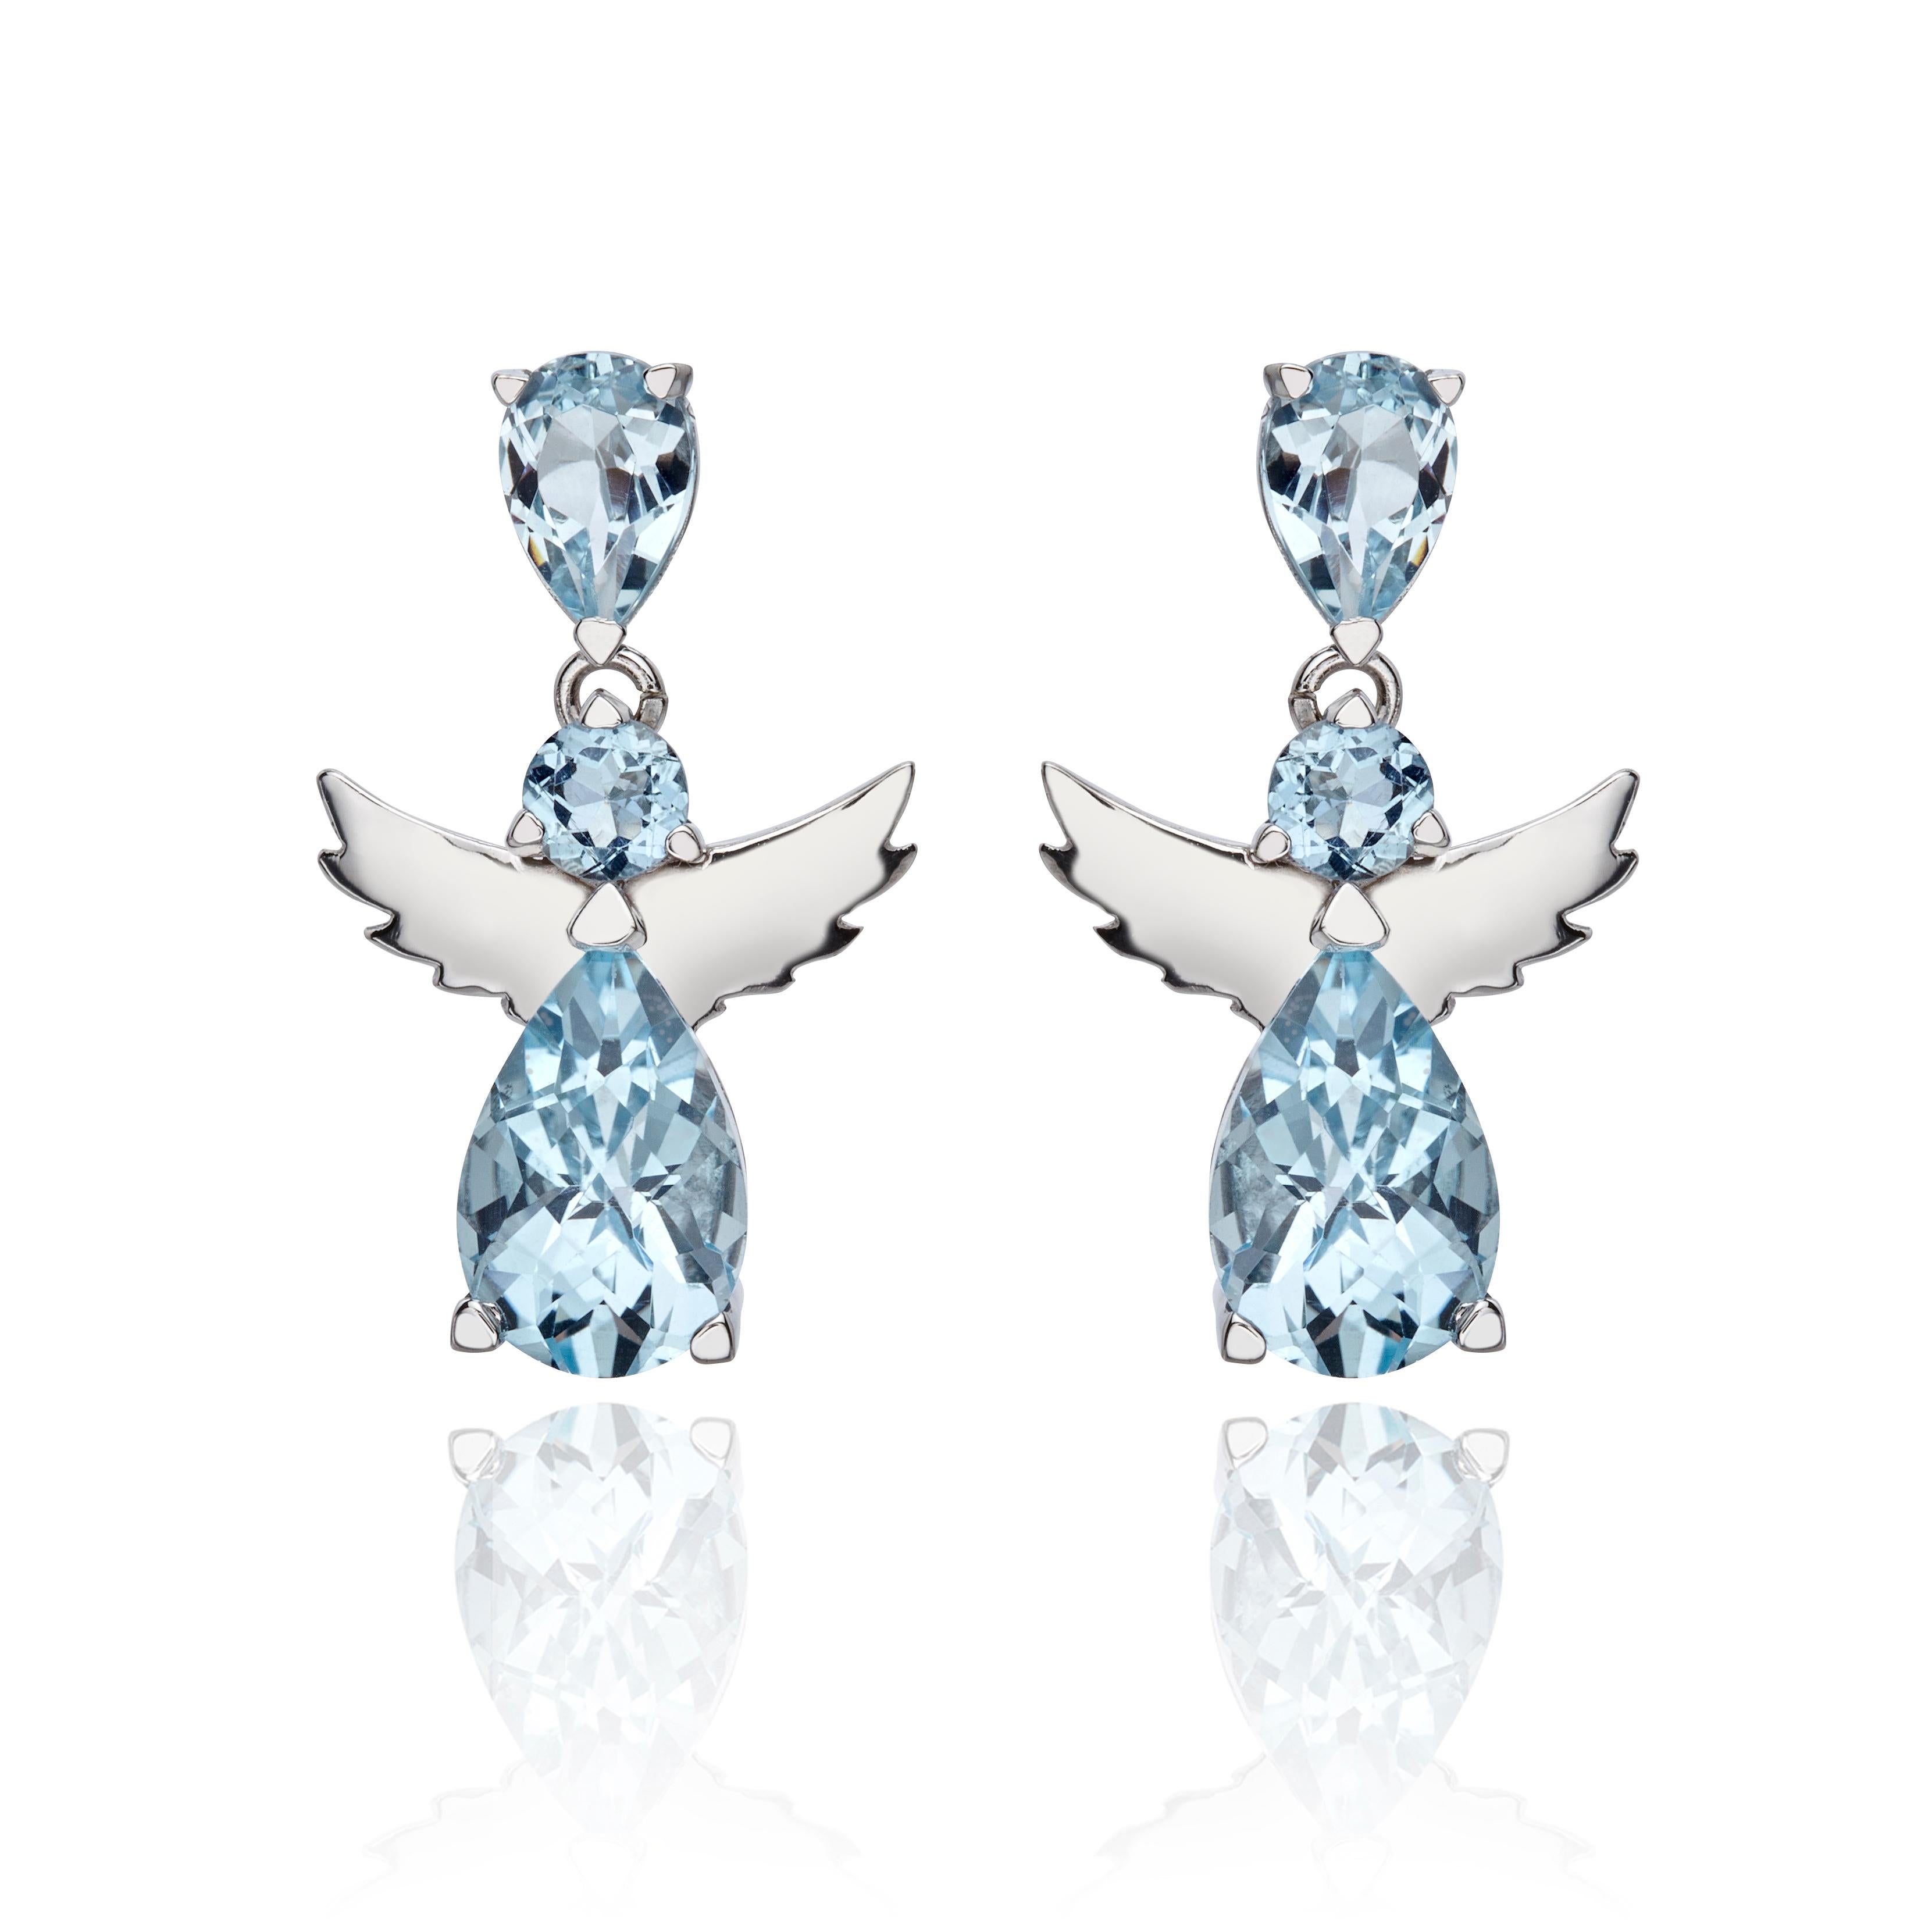 Contemporary Angel Drop Earrings 18Kt White Gold with Pear and Round Blue Topaz Gift for Her For Sale